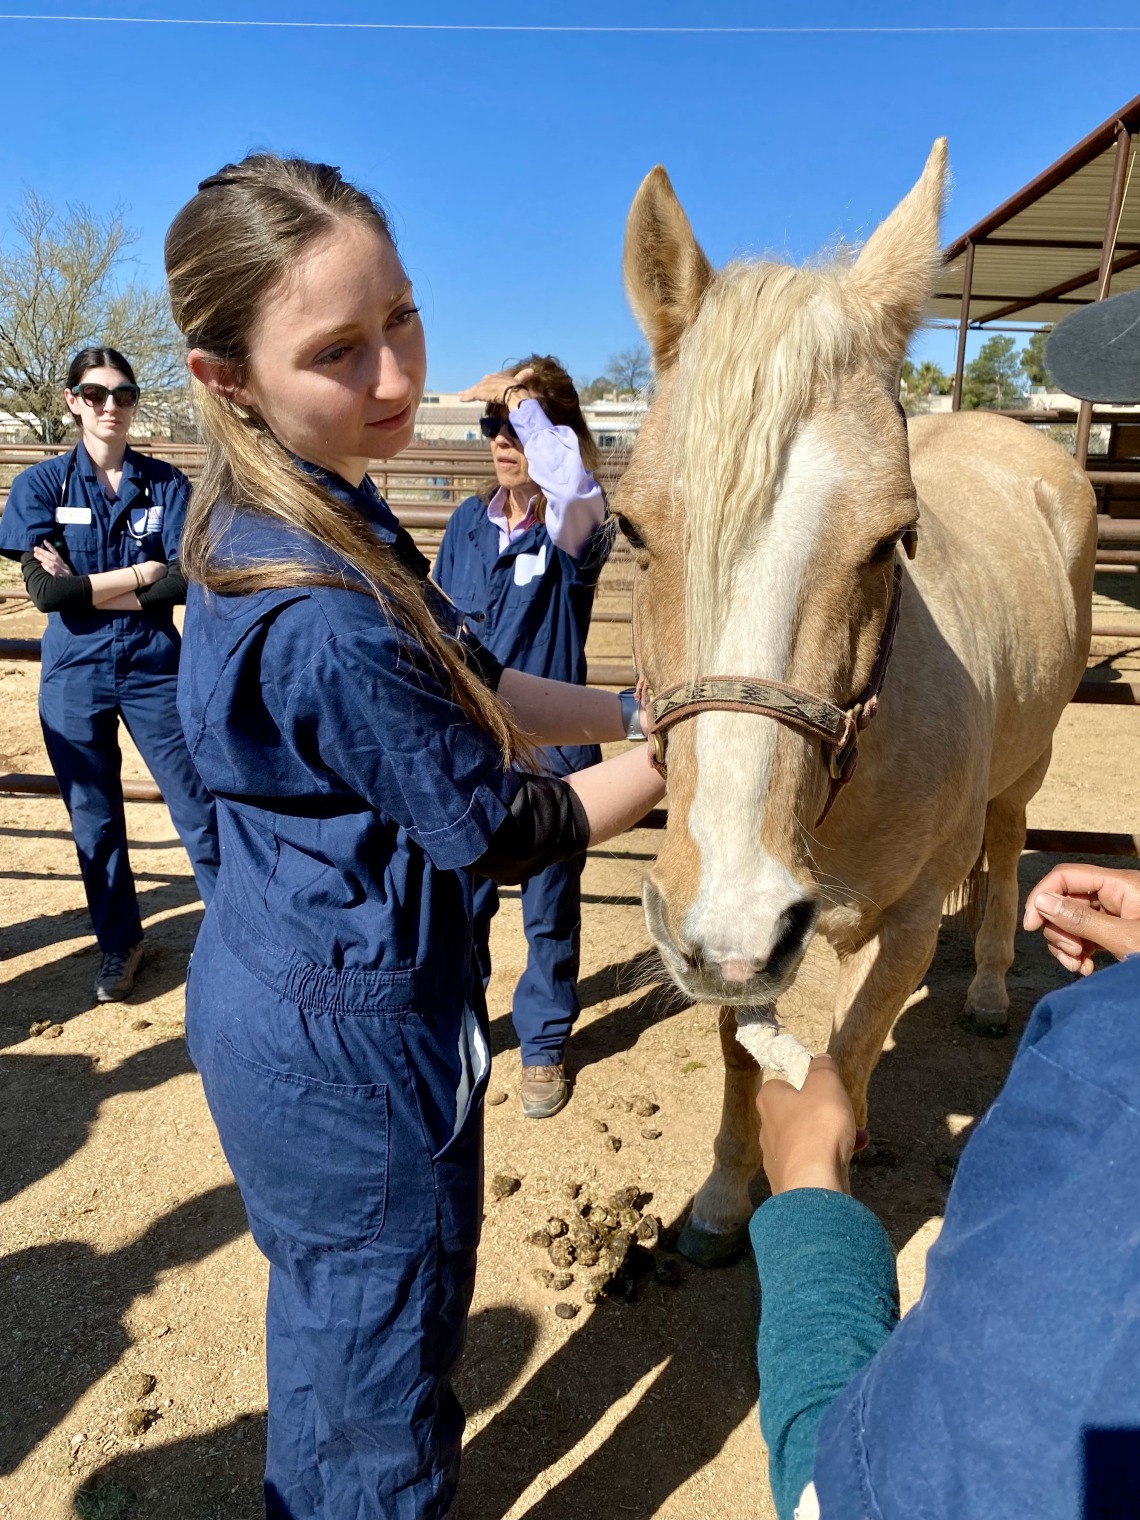 A student stands next to a palomino horse and looks at the horse.